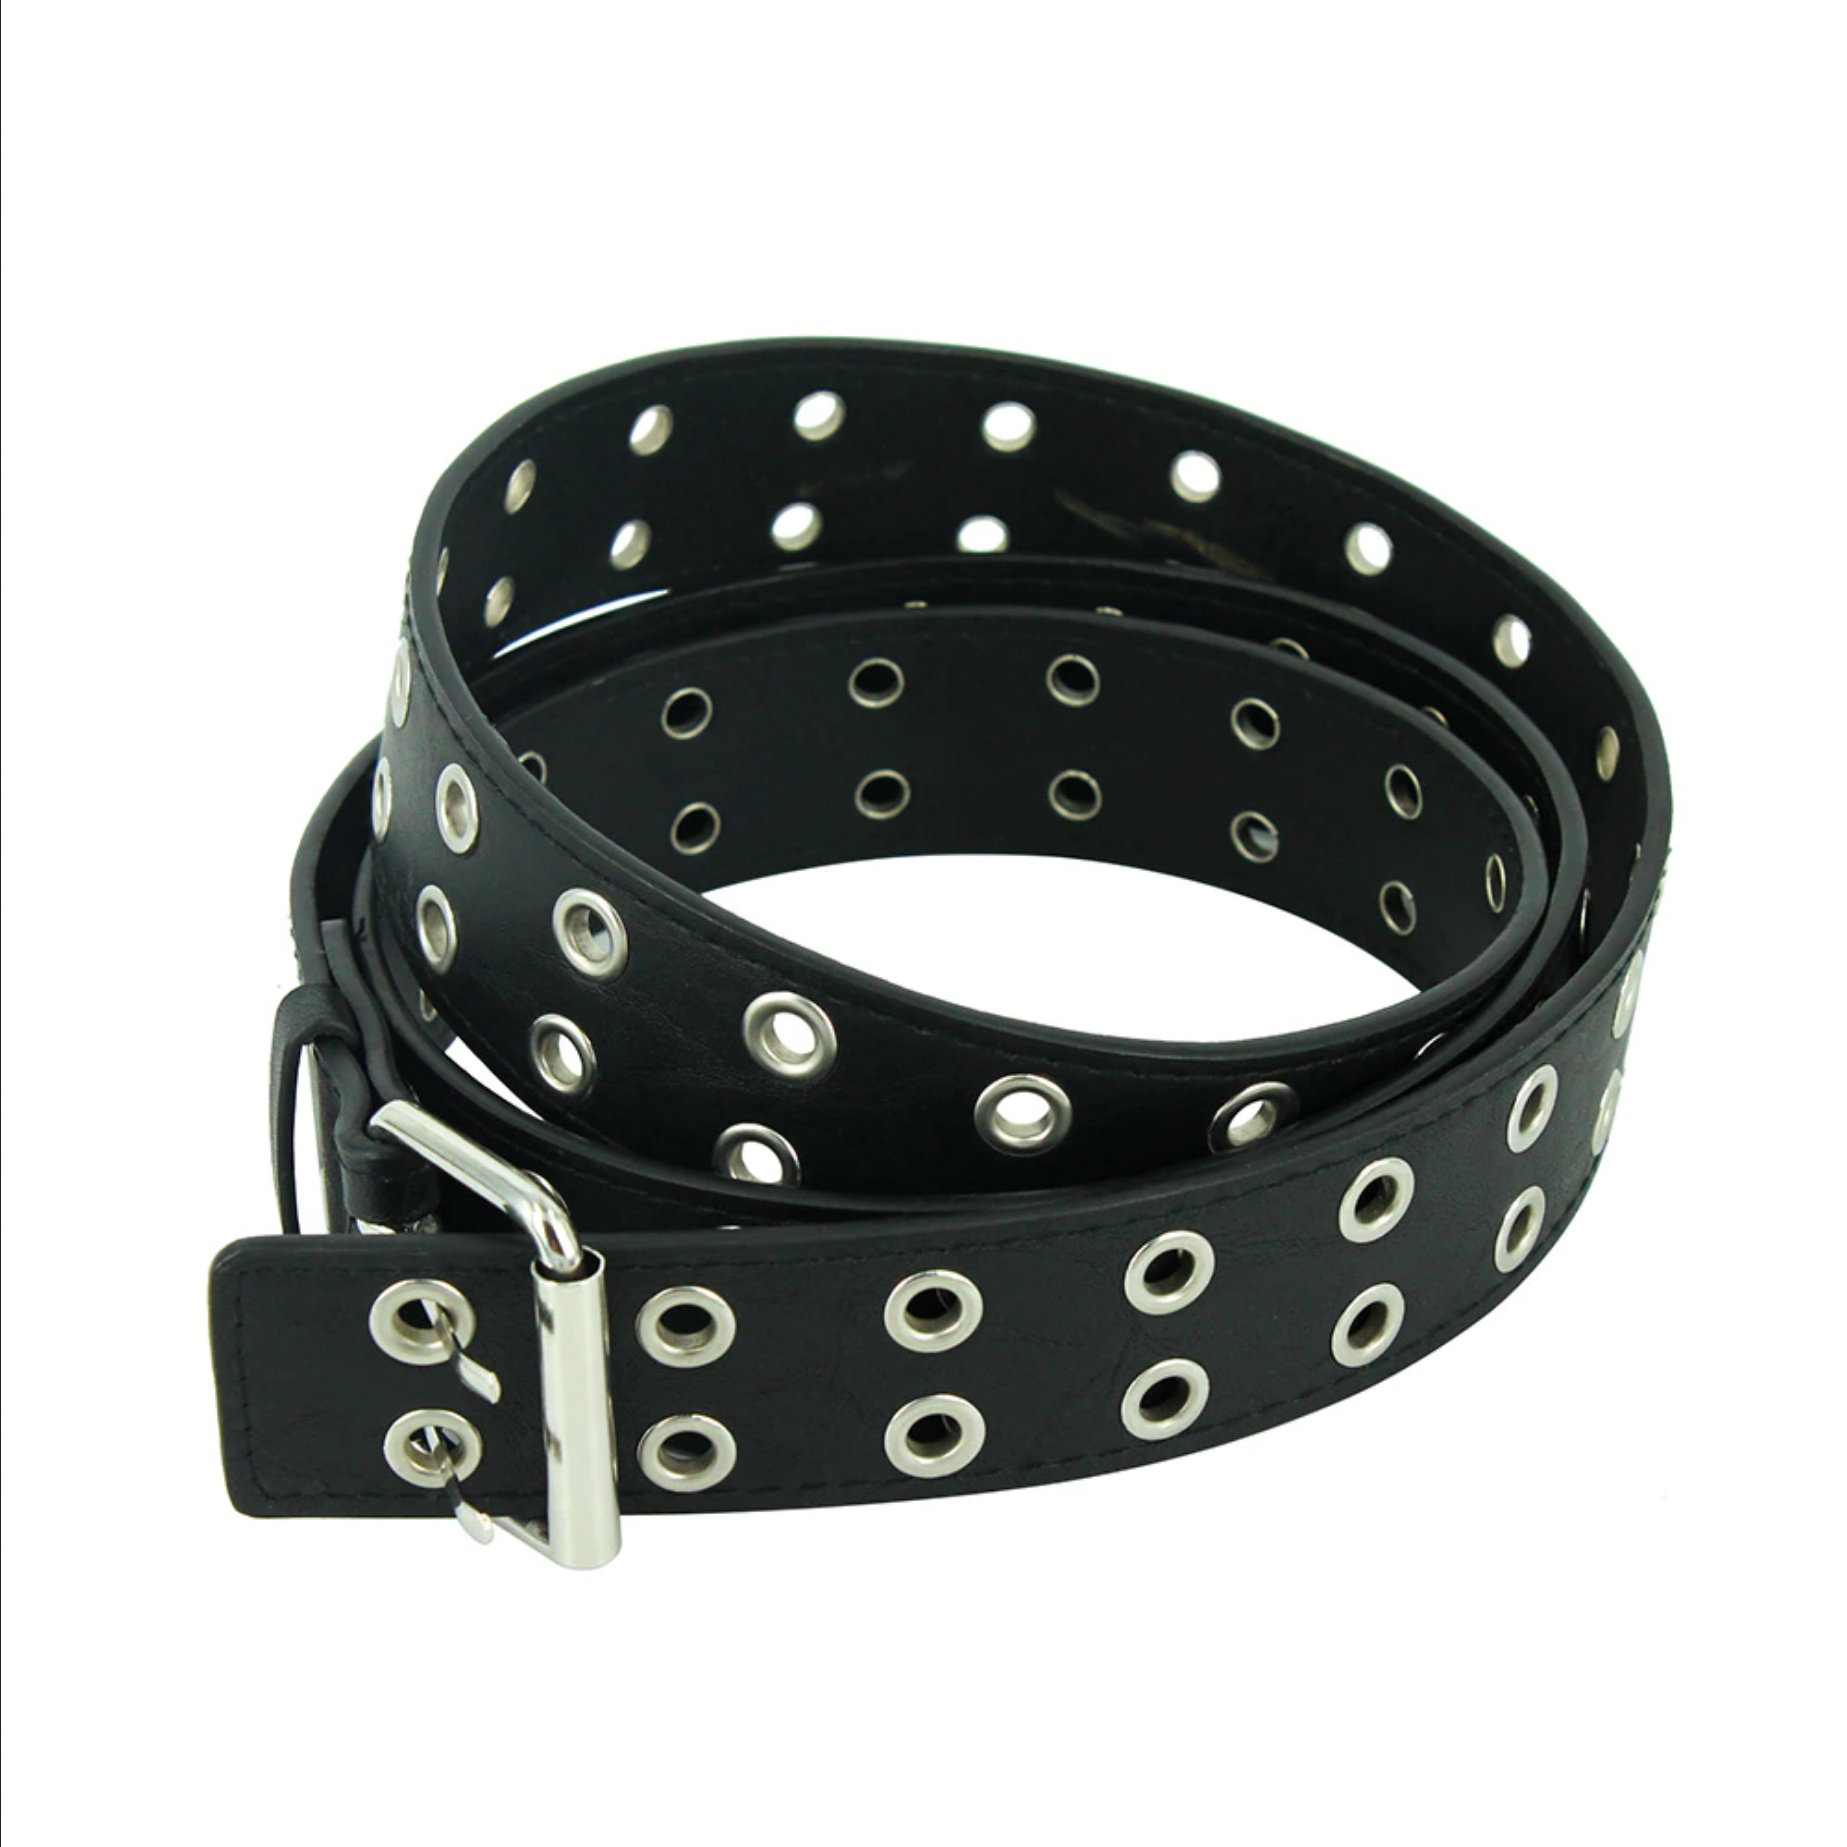 Gothic Leather Belt with Metal Buckle - Adjustable and Stylish